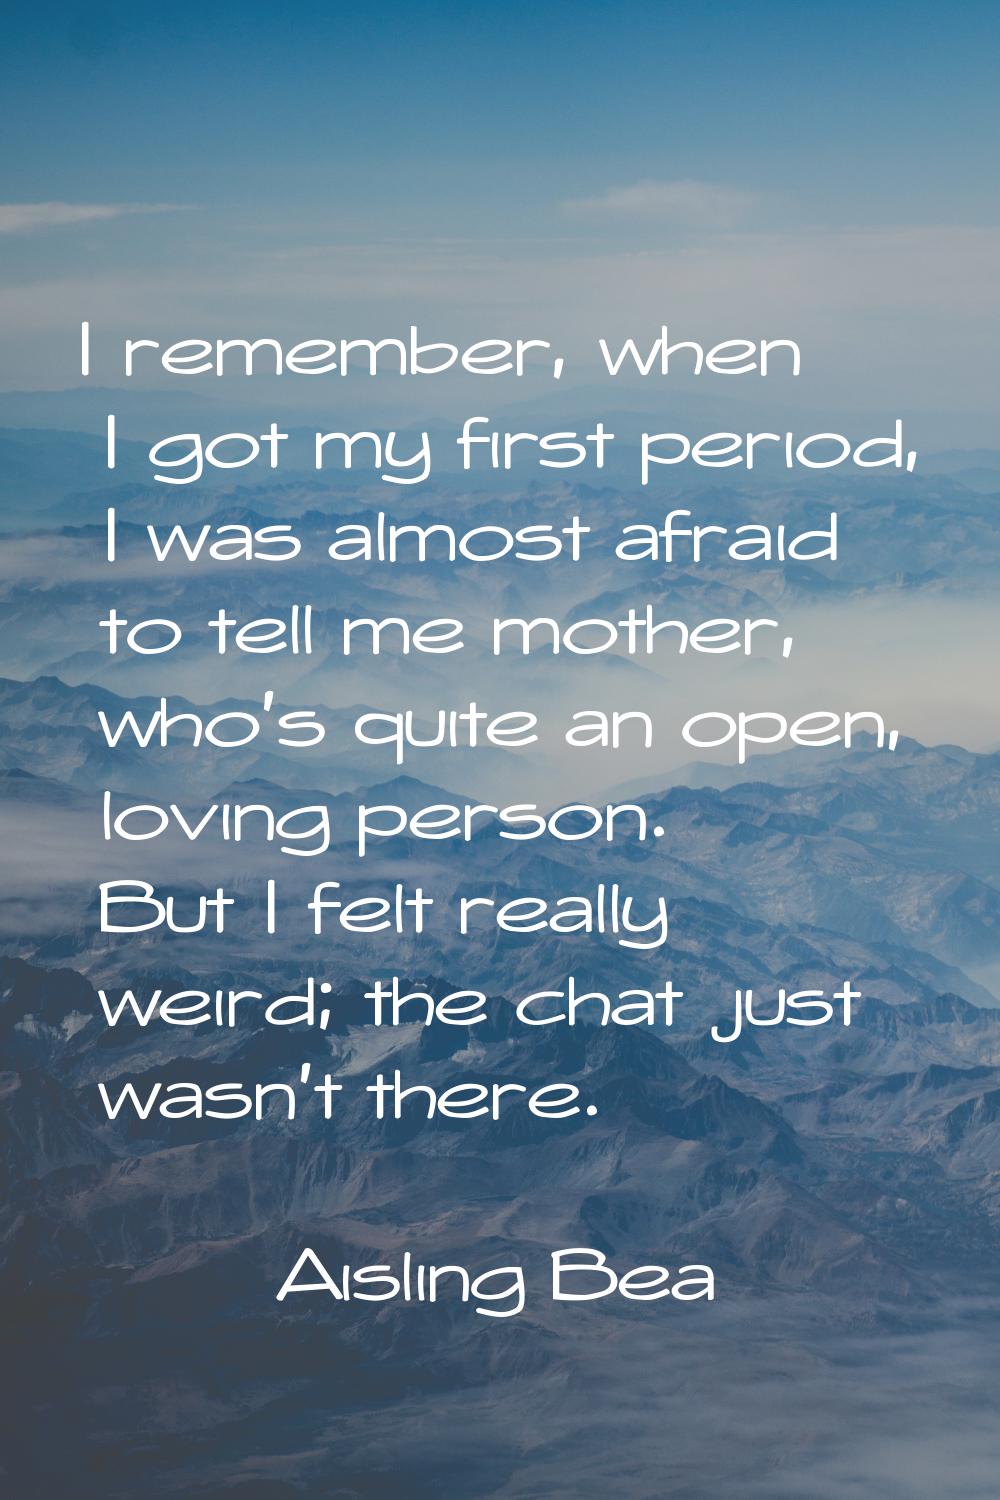 I remember, when I got my first period, I was almost afraid to tell me mother, who's quite an open,